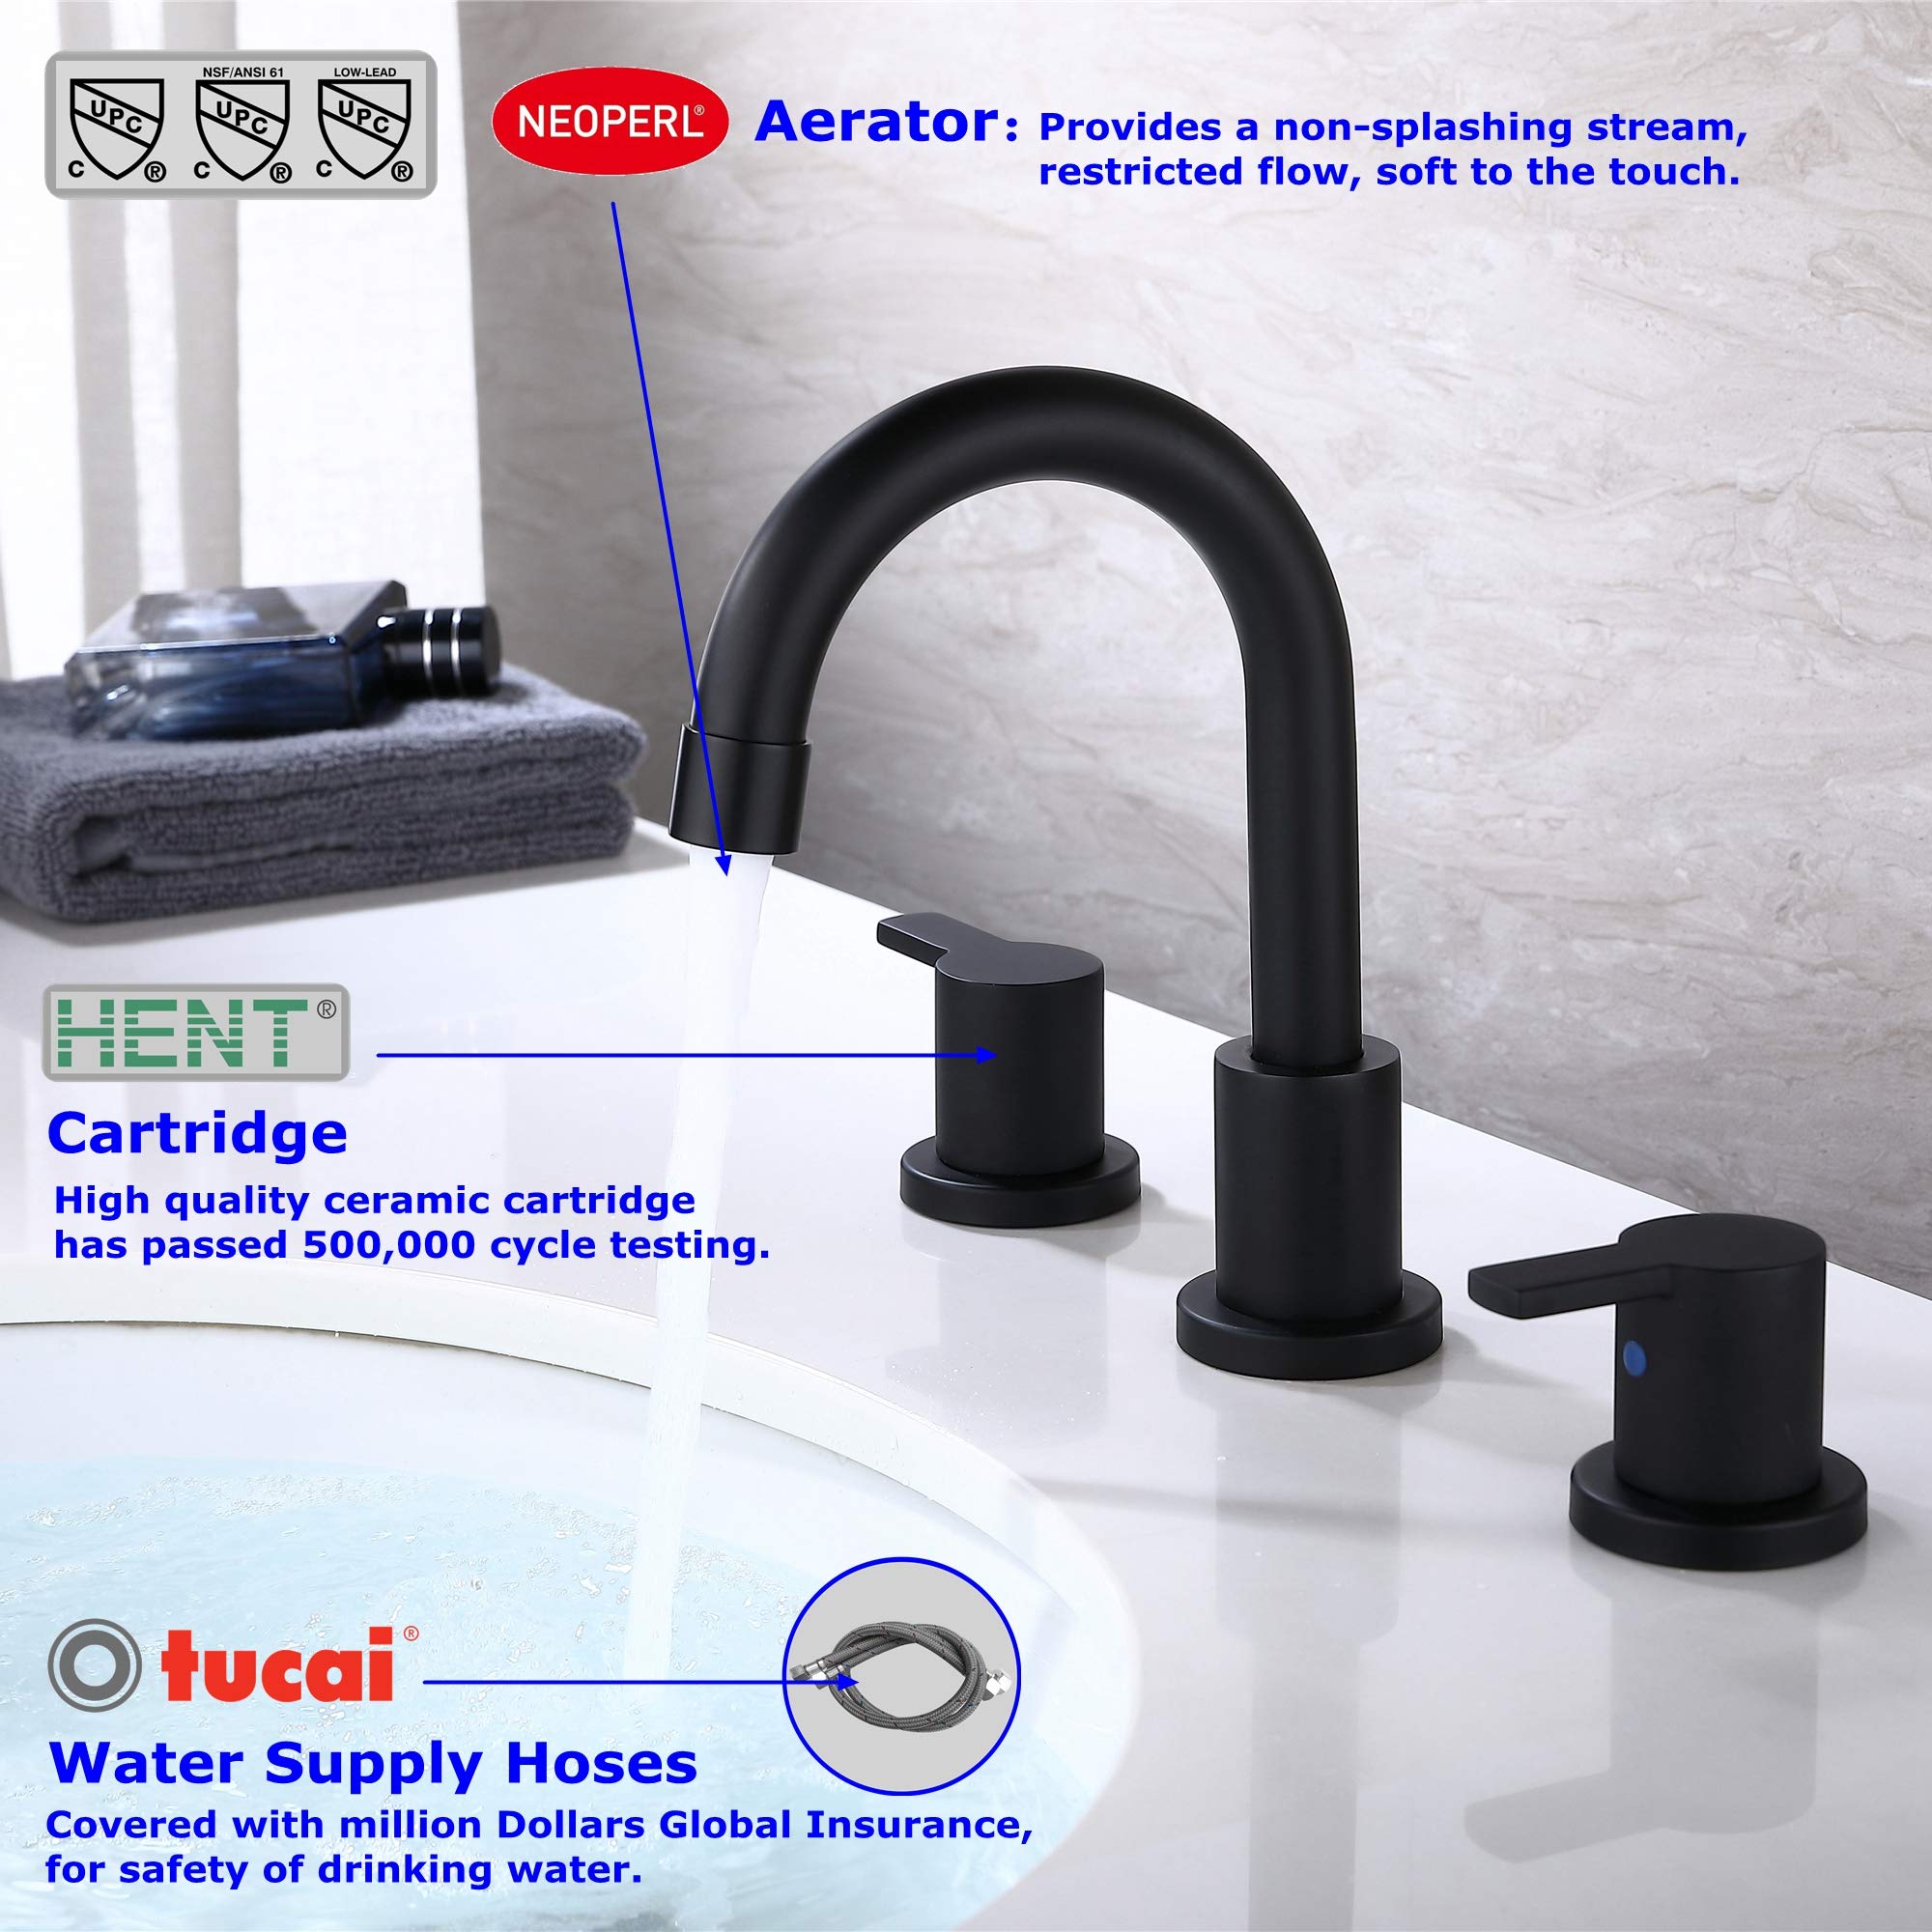 RKF Two Handle Widespread Bathroom Sink Faucet with Pop-up Drain with overflow and CUPC Faucet Supply Hoses,Matte Black,WF015-9-MB